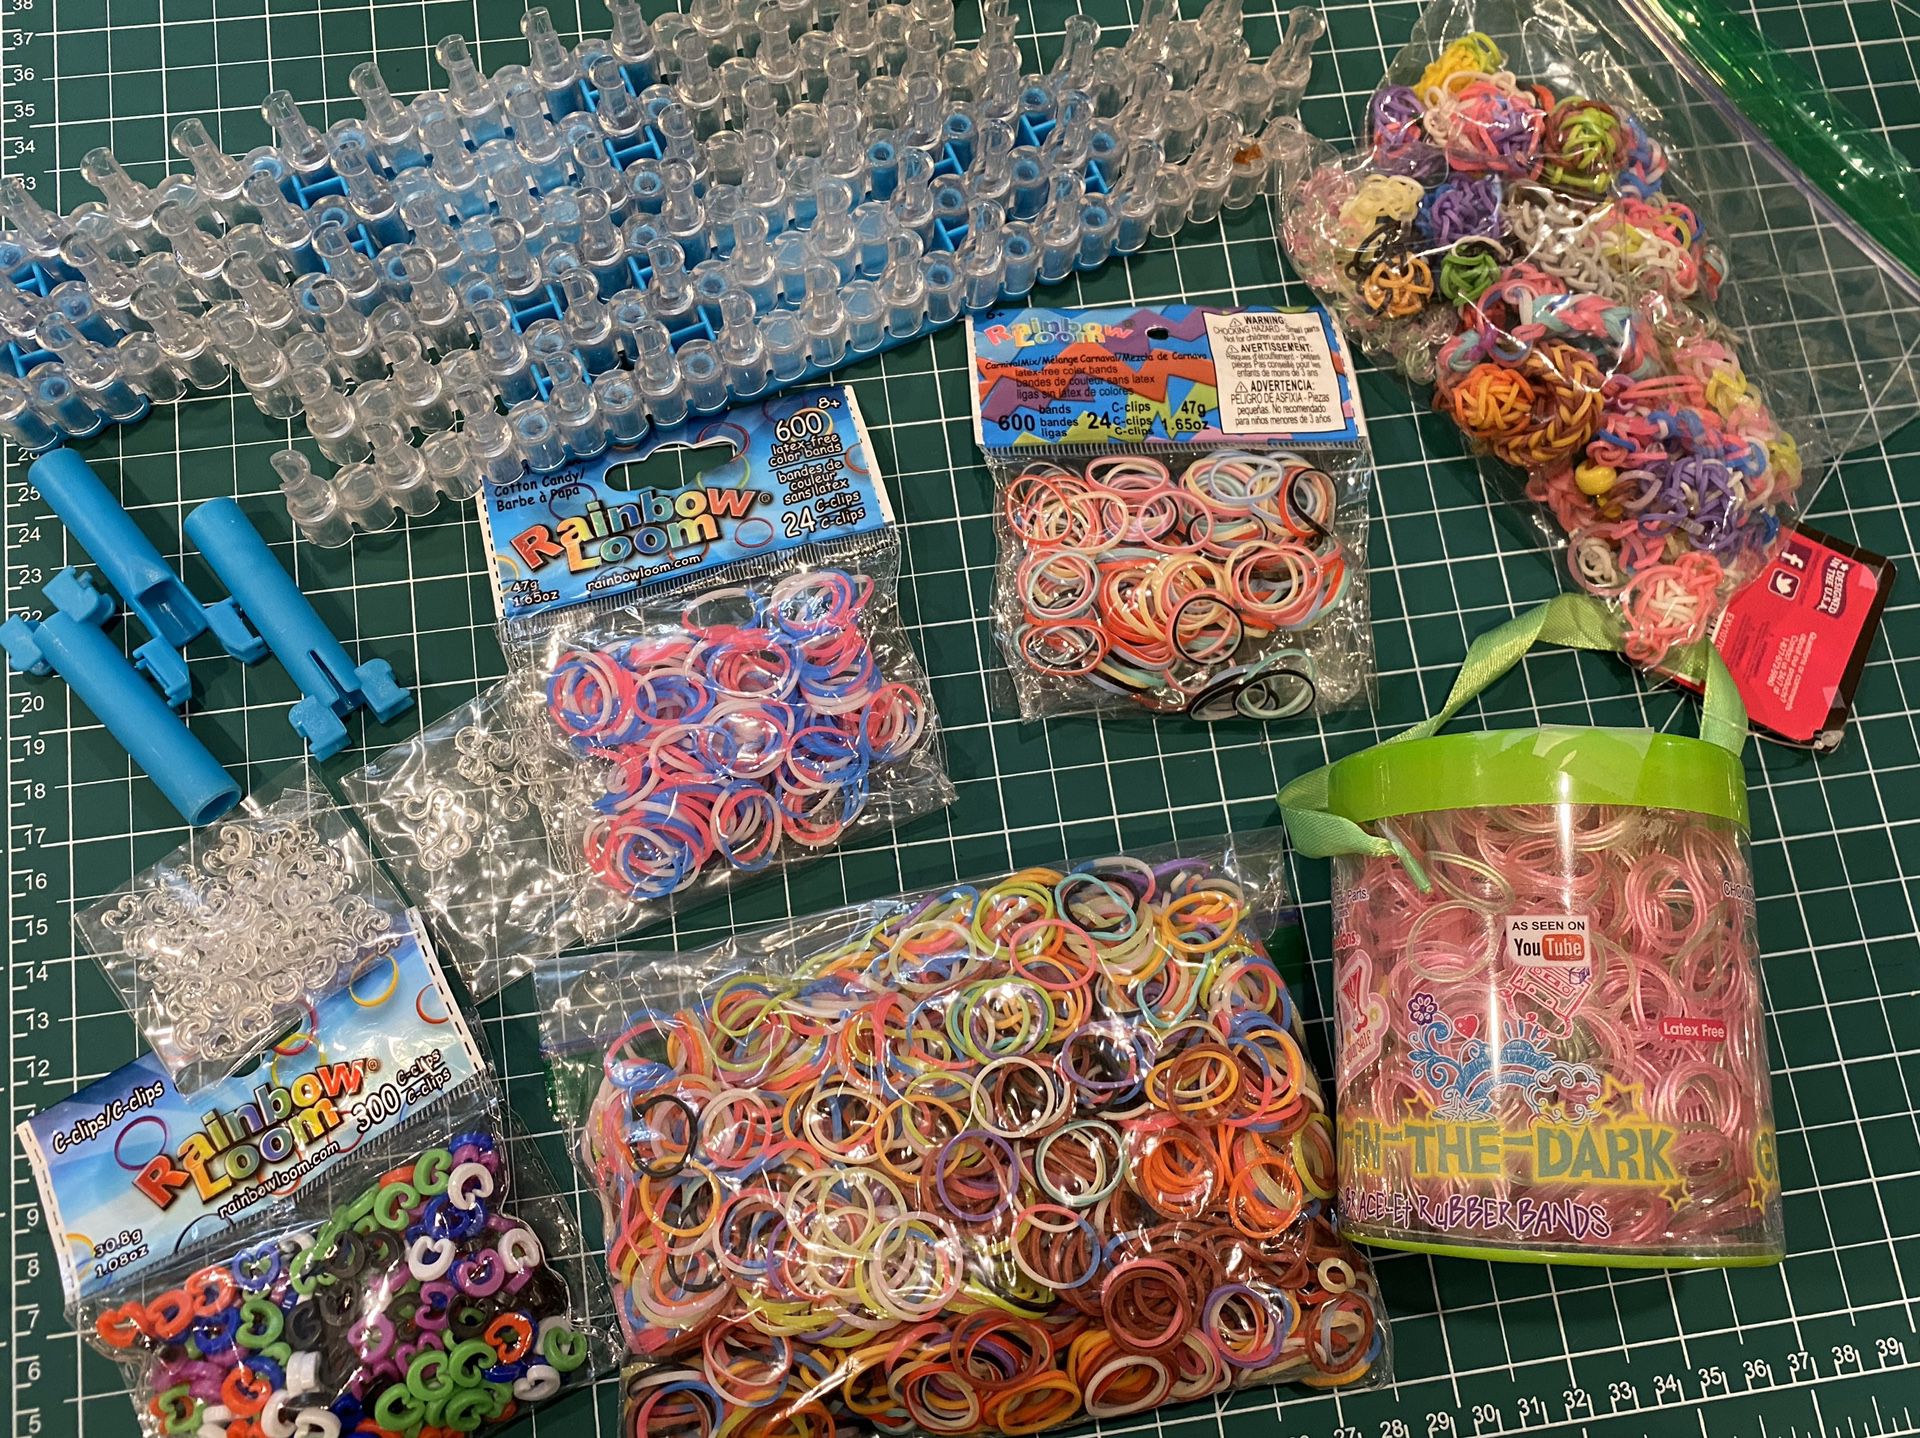 Rainbow Loom kit only $8 for all